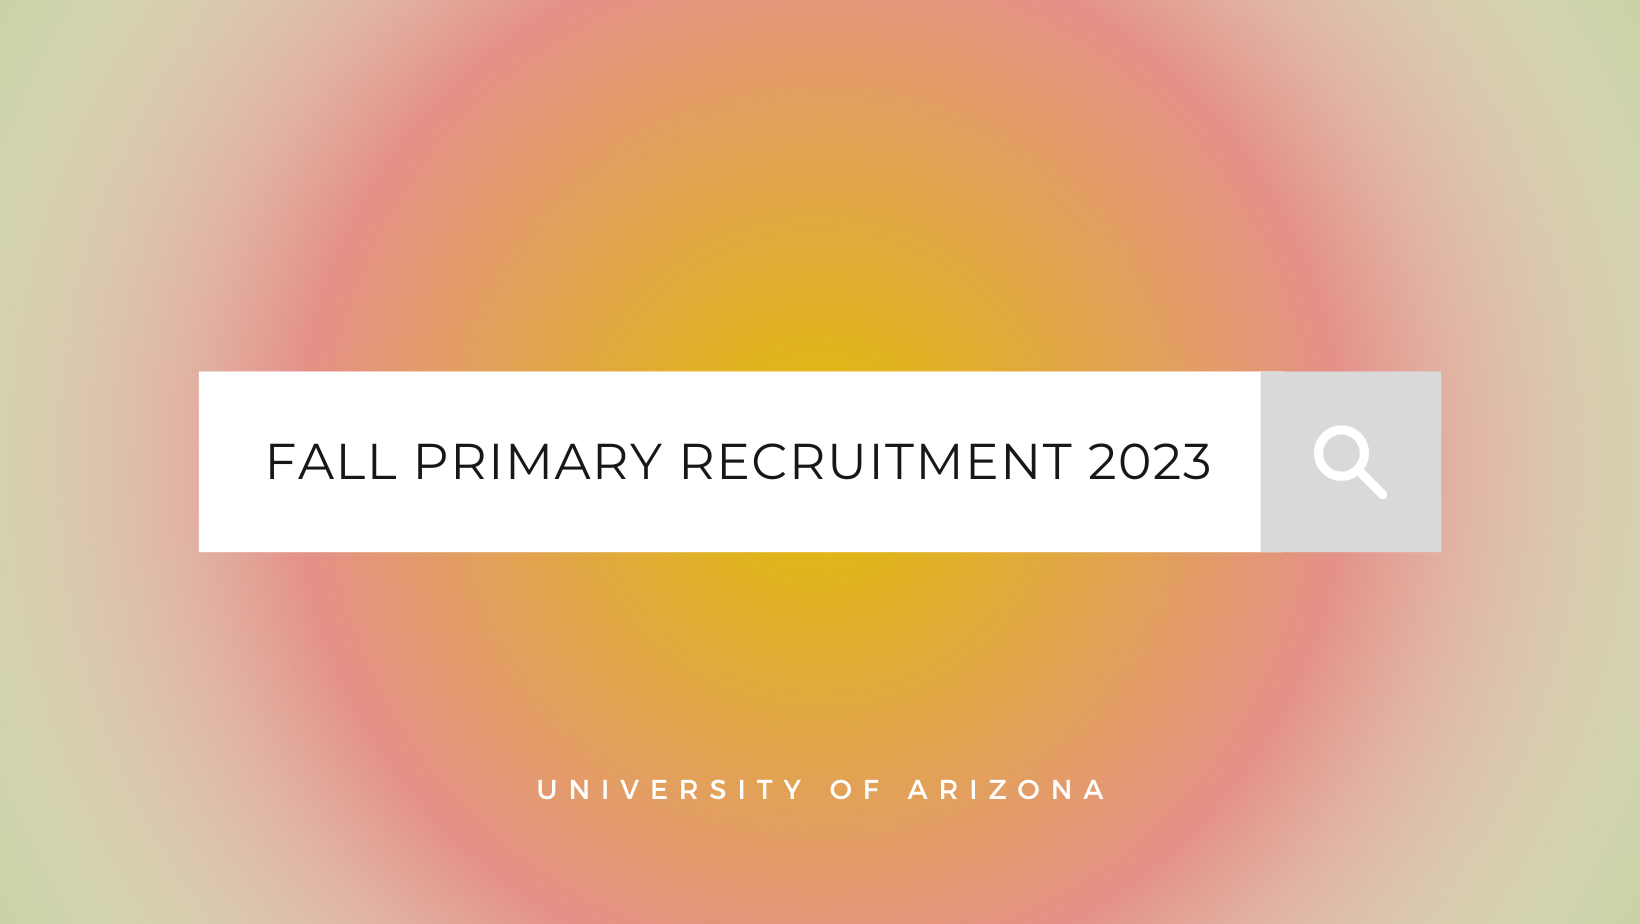 Fall Primary Recruitment Image